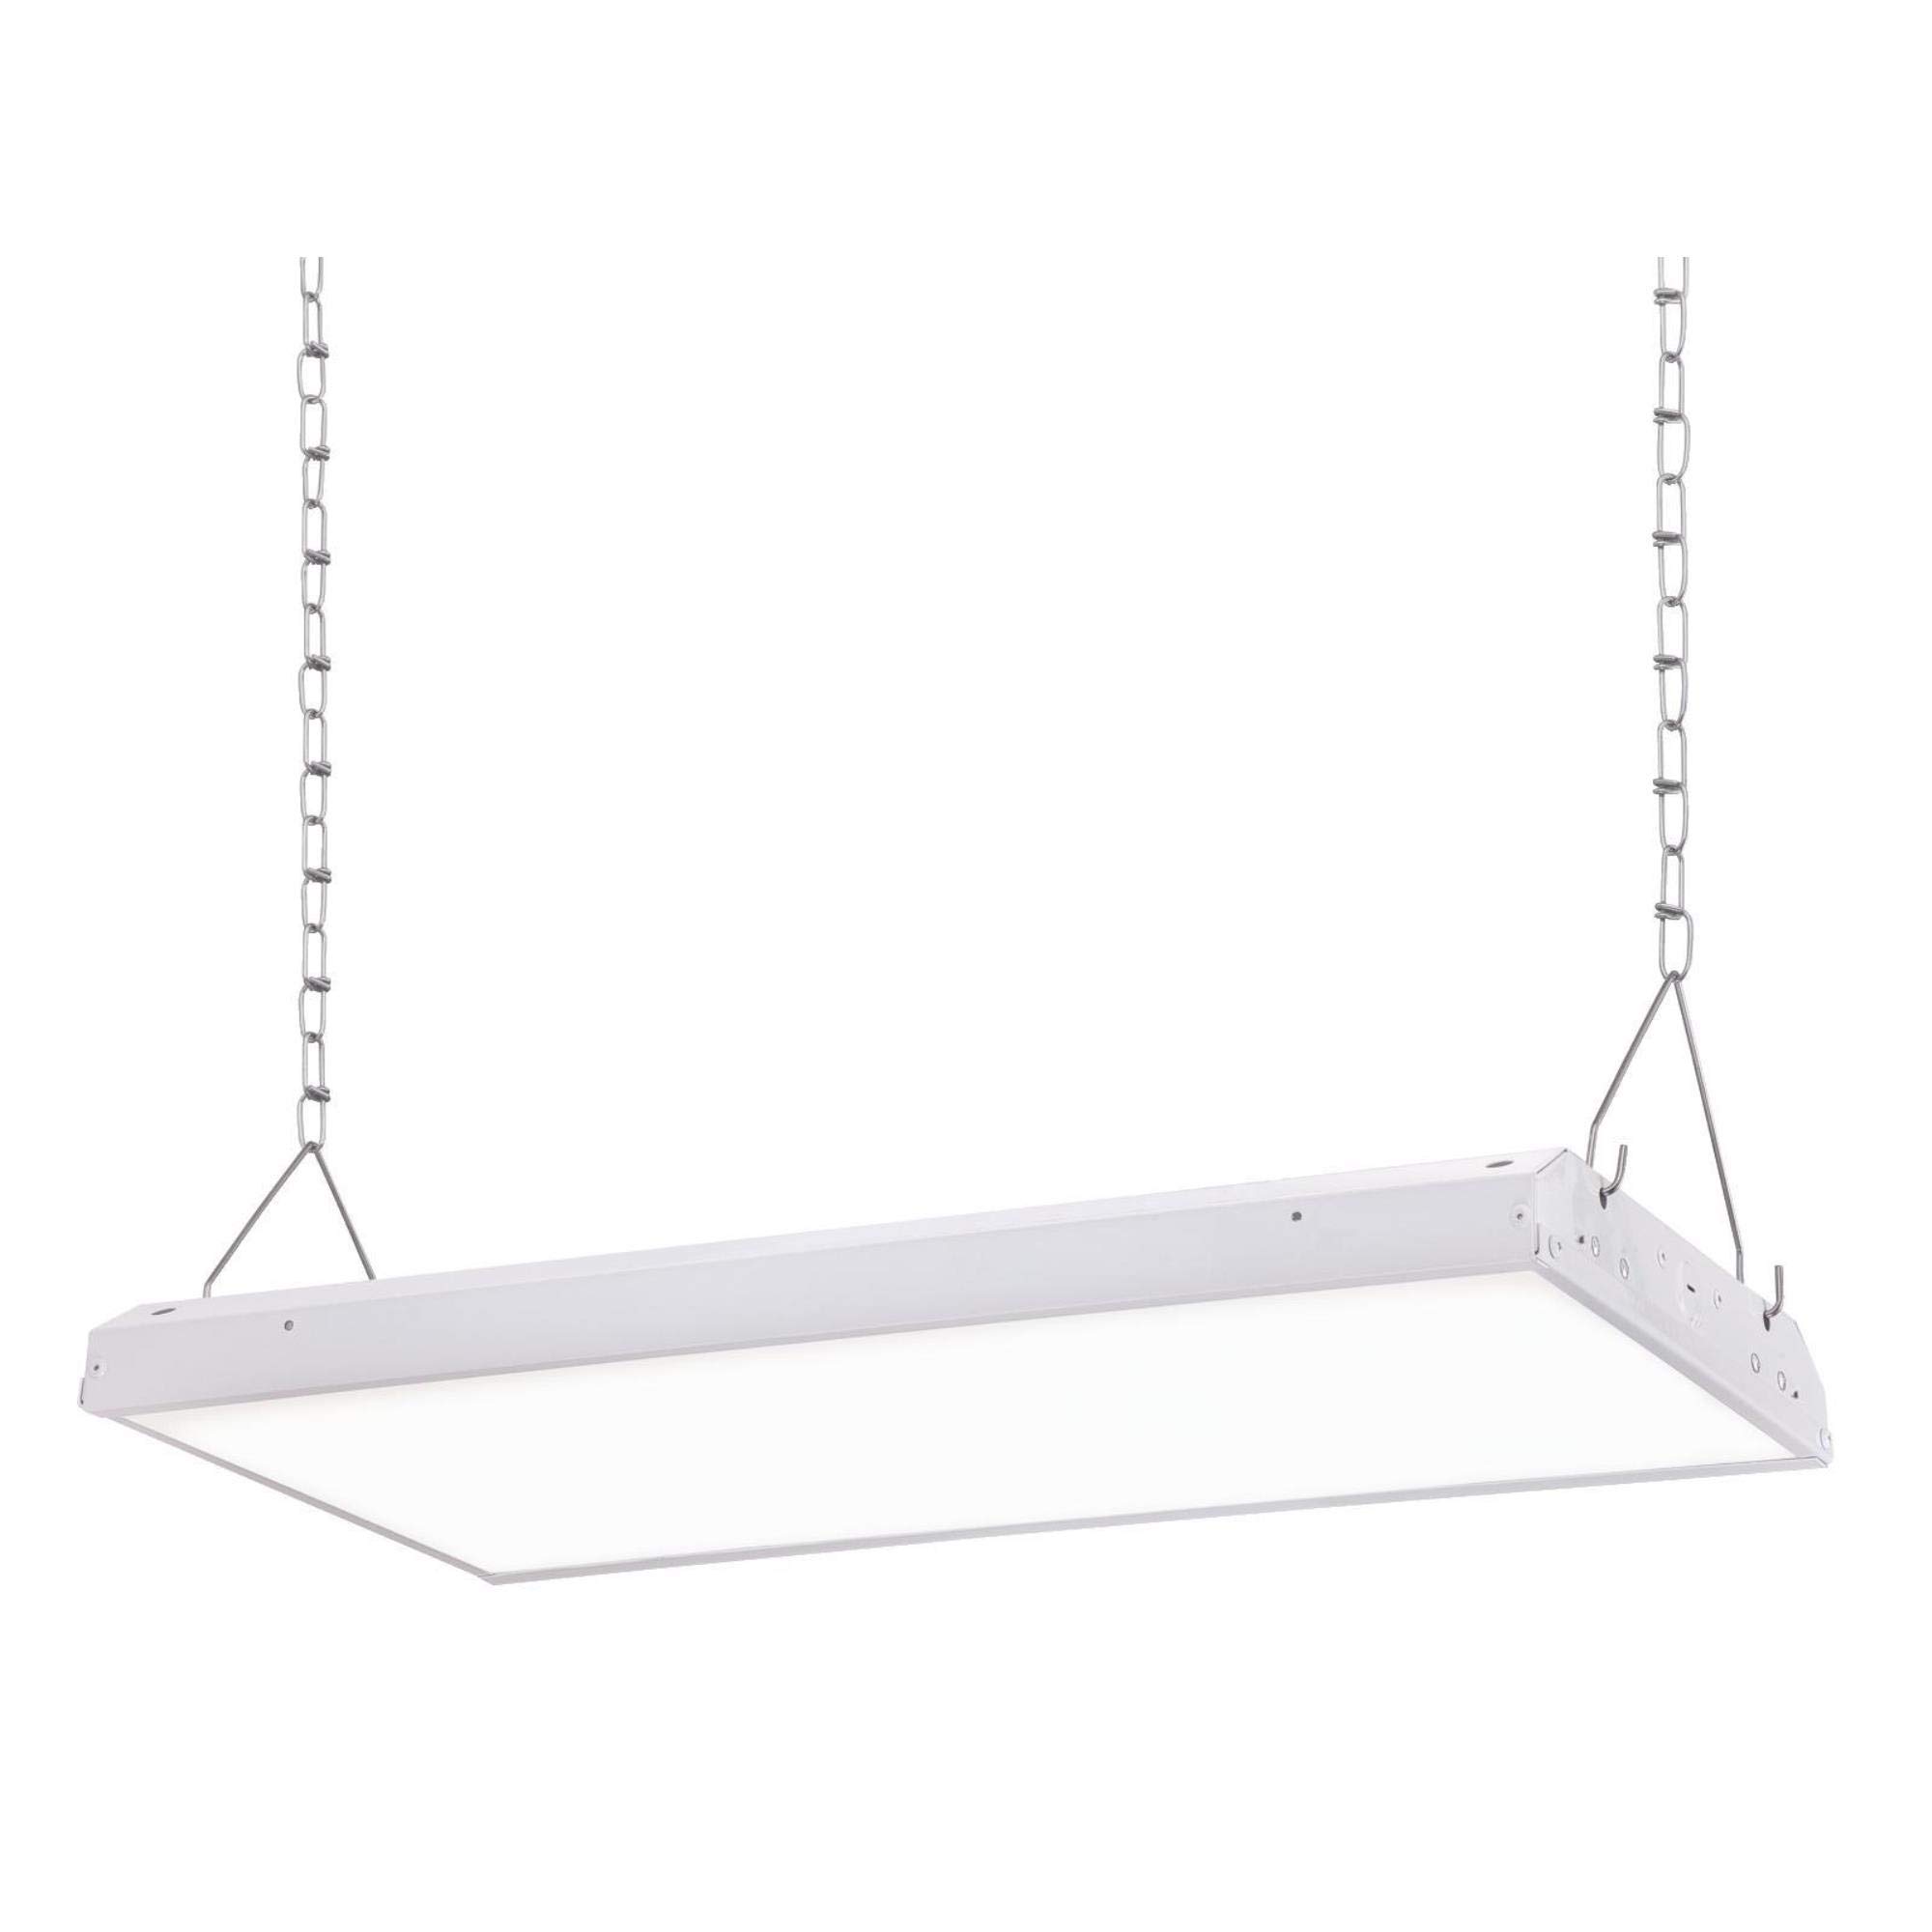 2 ft. 110 Watt LED Linear High Bay Fixture White Finish with Frosted Acrylic Diffuser